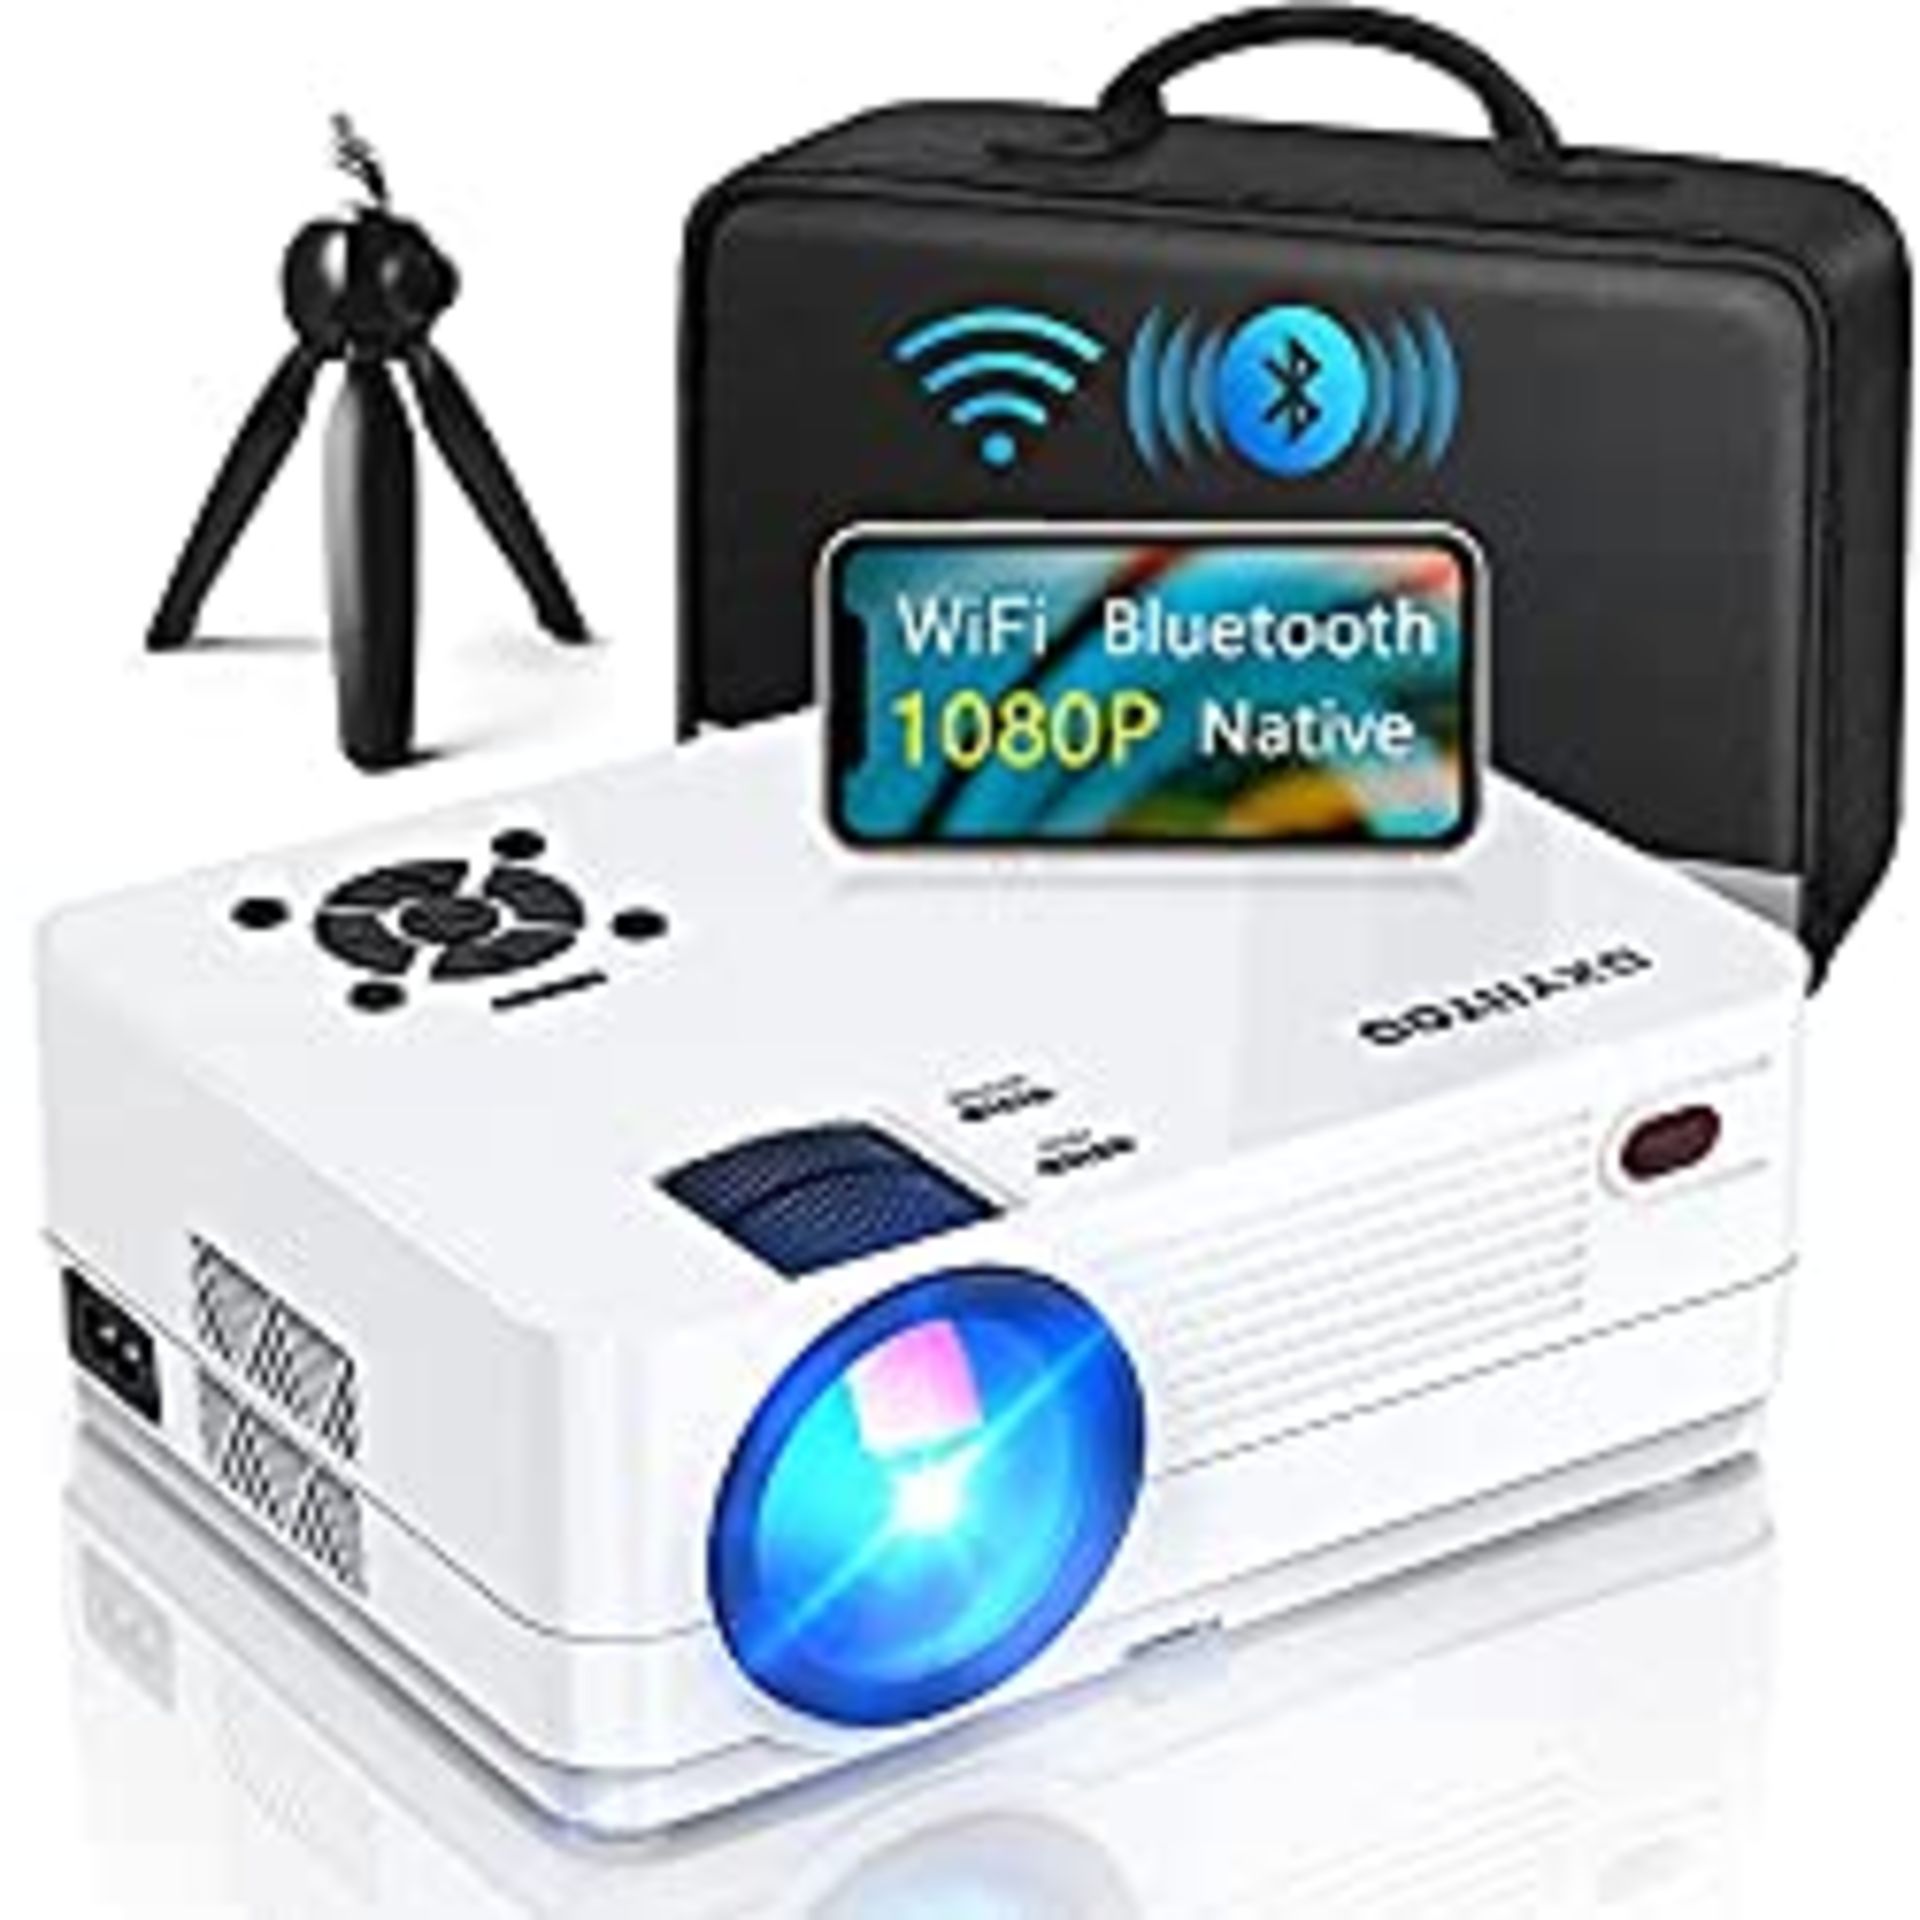 RRP £196.77 Native 1080P Projector with WiFi and Two-Way Bluetooth